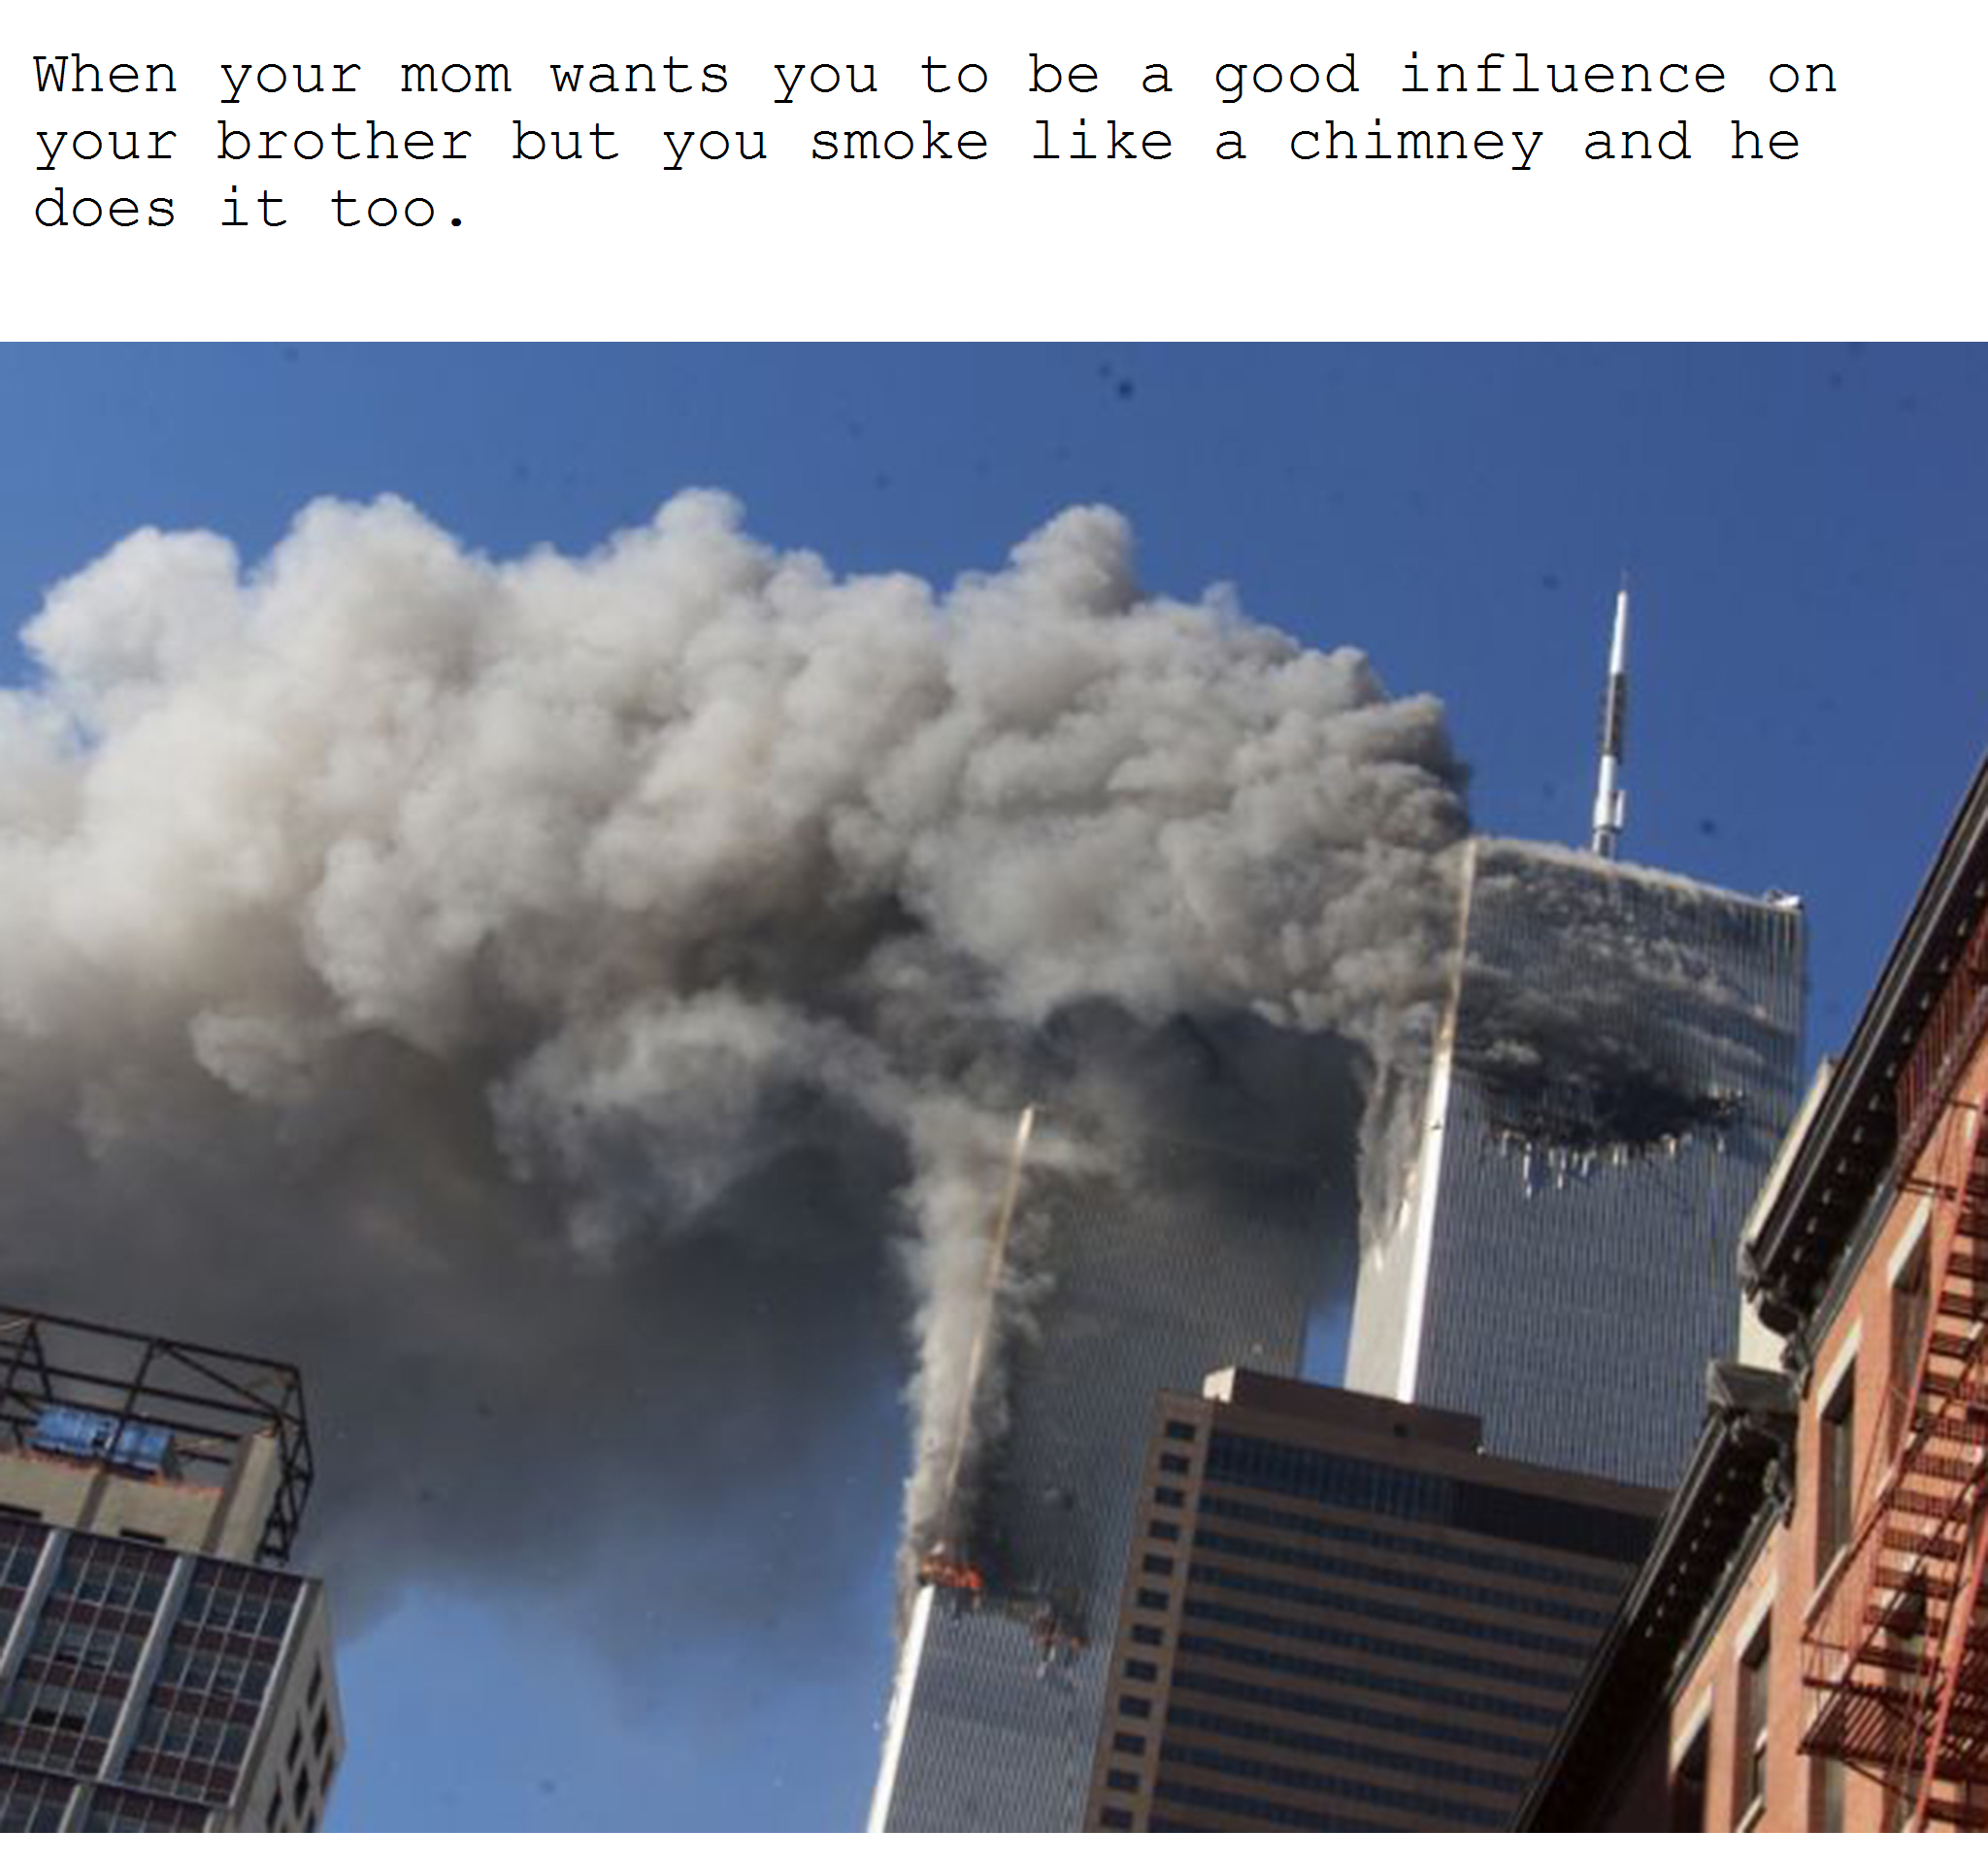 9/11 people will agree